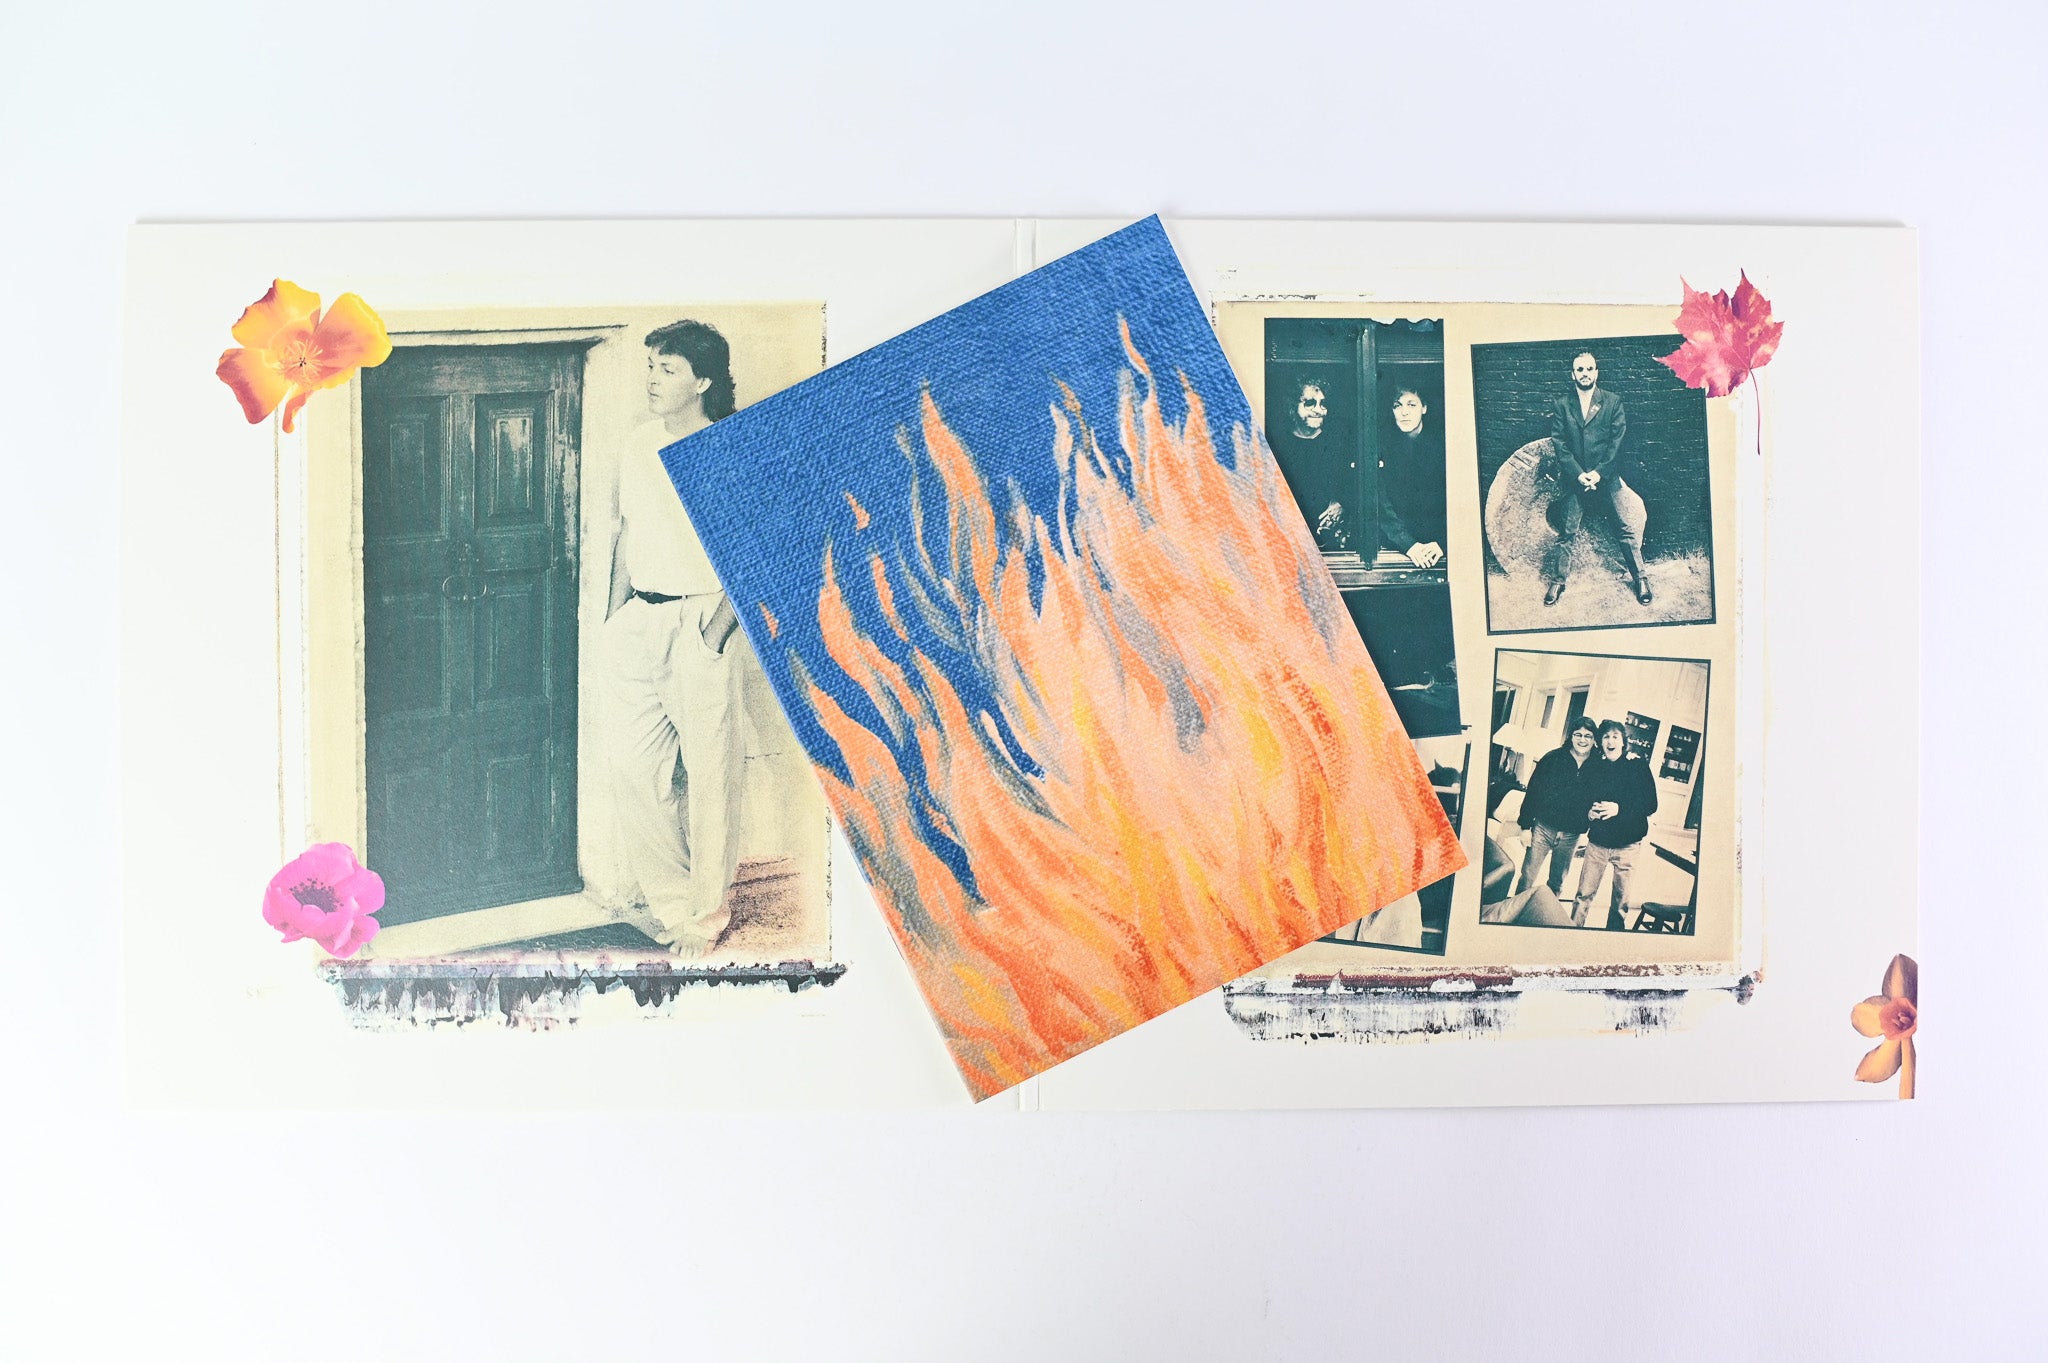 Paul McCartney - Flaming Pie on MPL - Numbered Collectors Edition